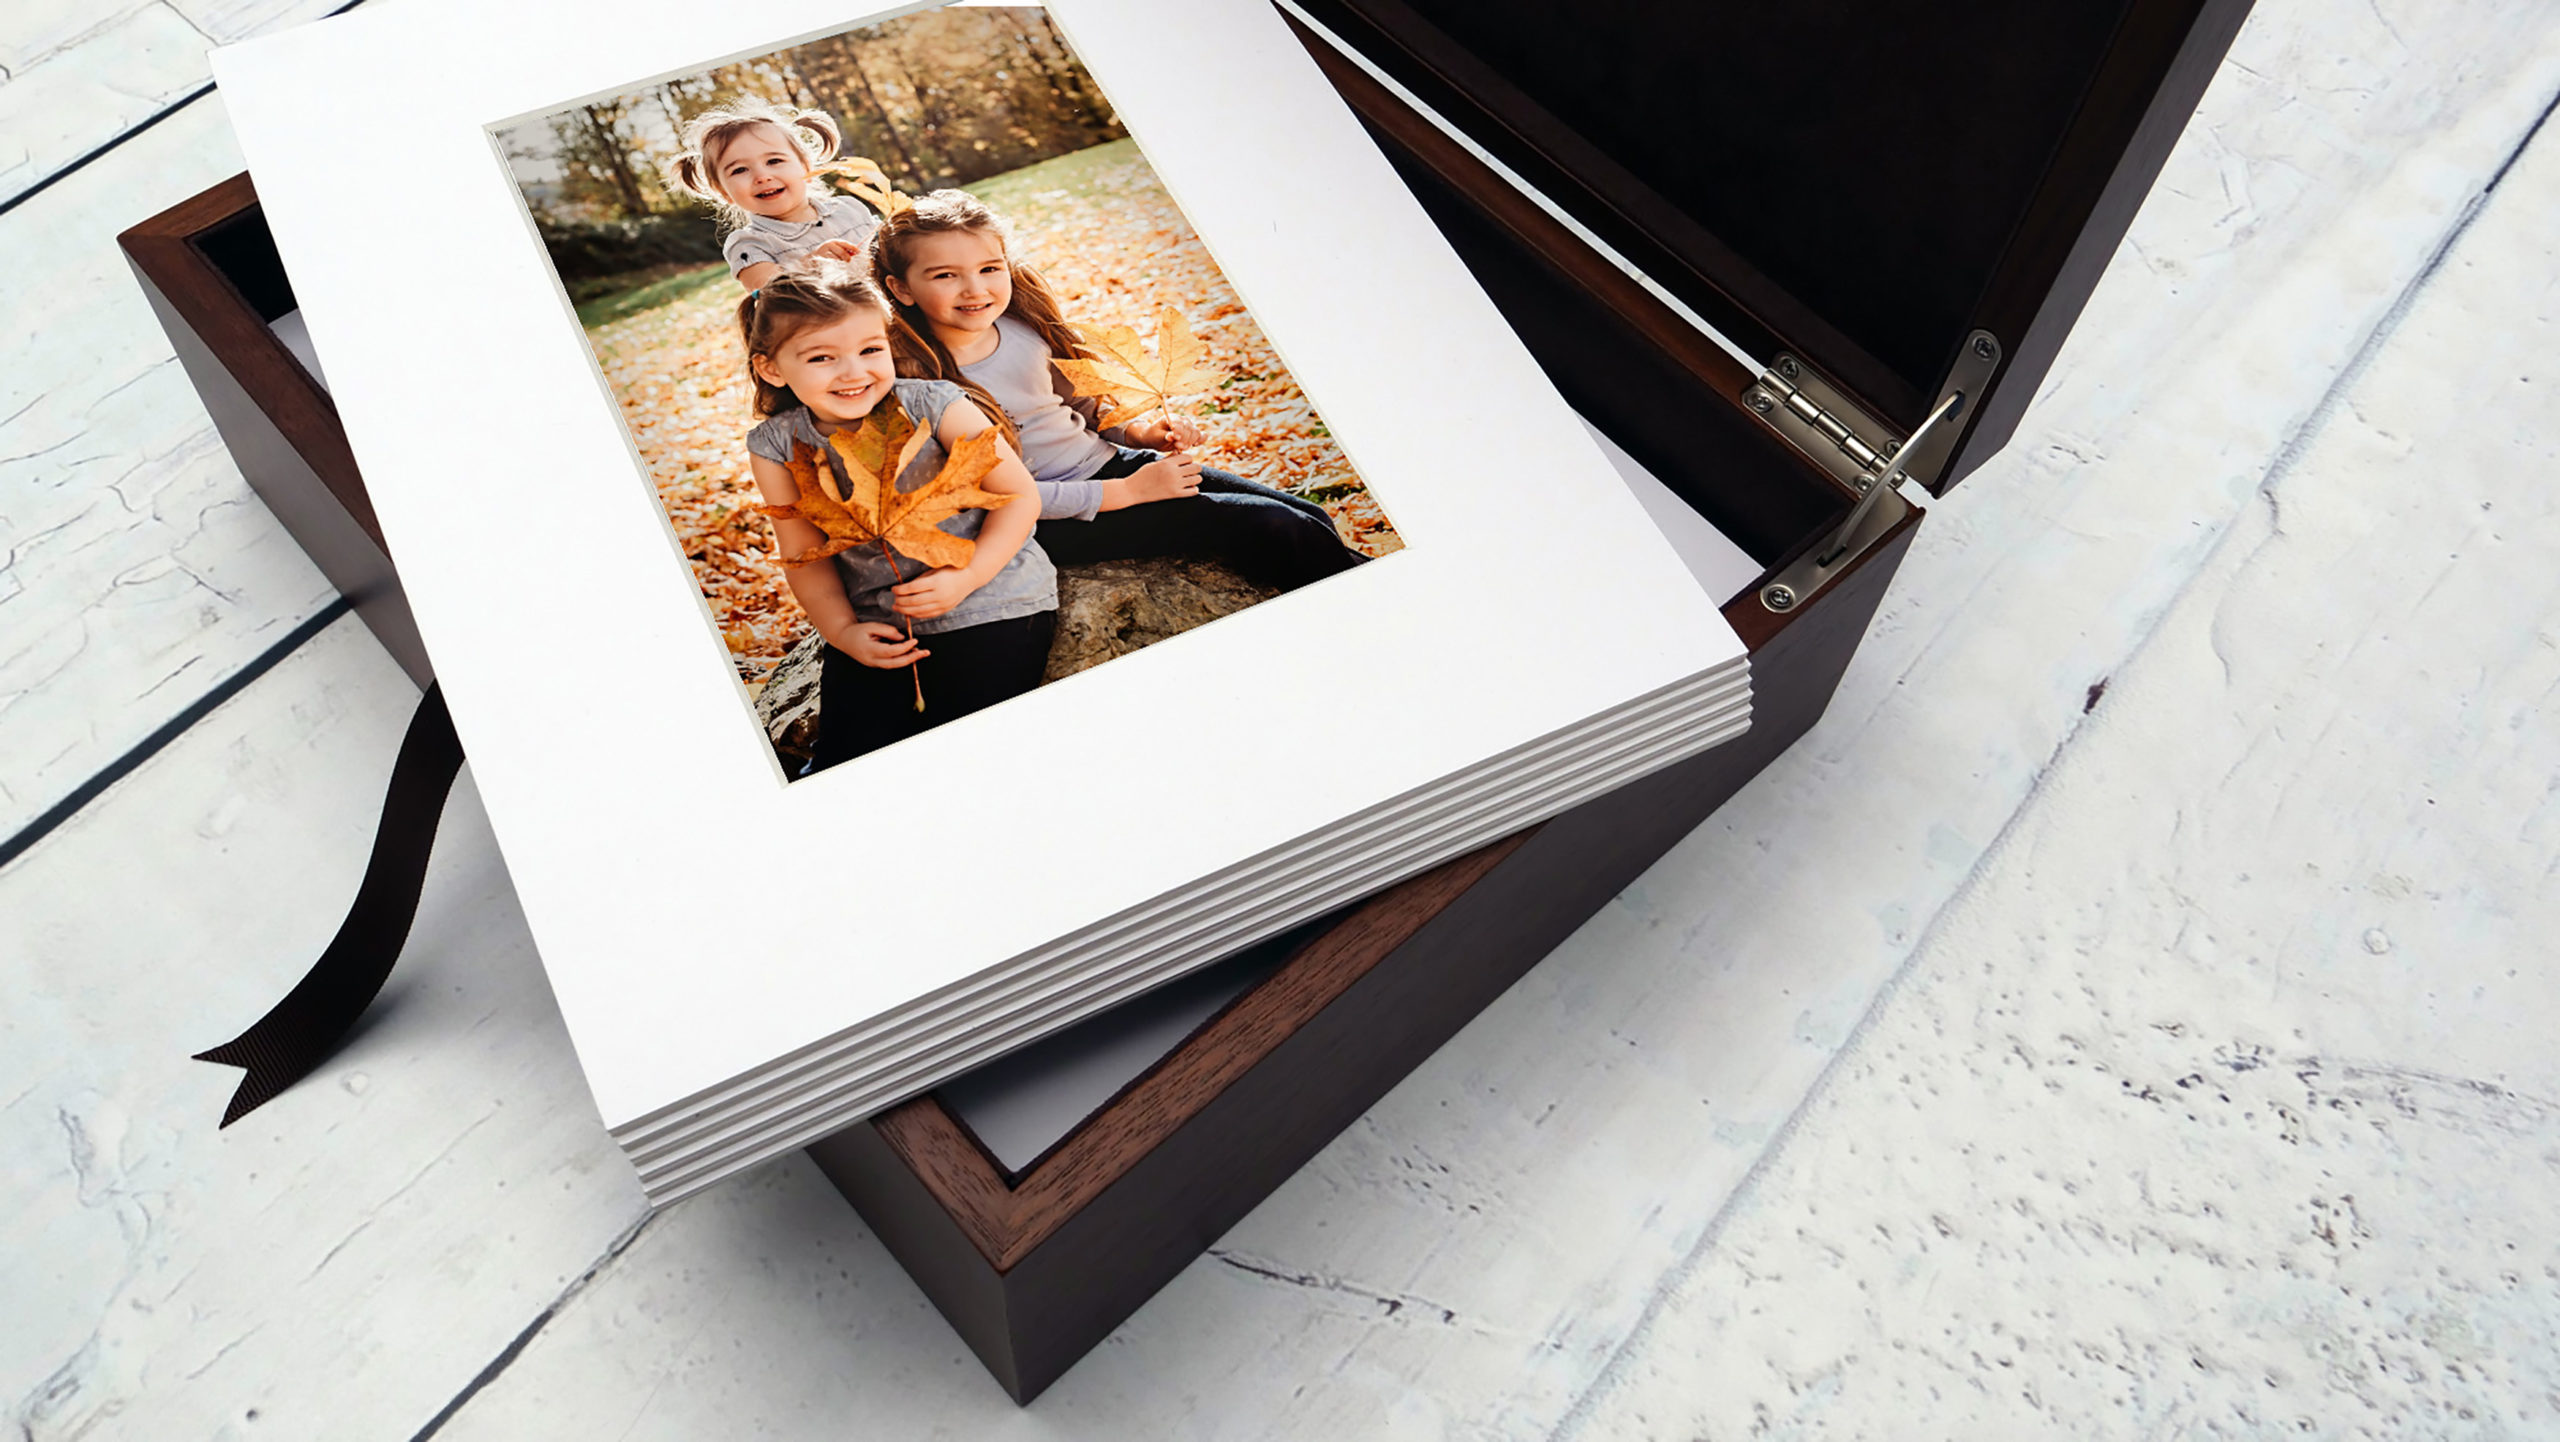 Photo Printing is More Important Than Ever in the Digital Era